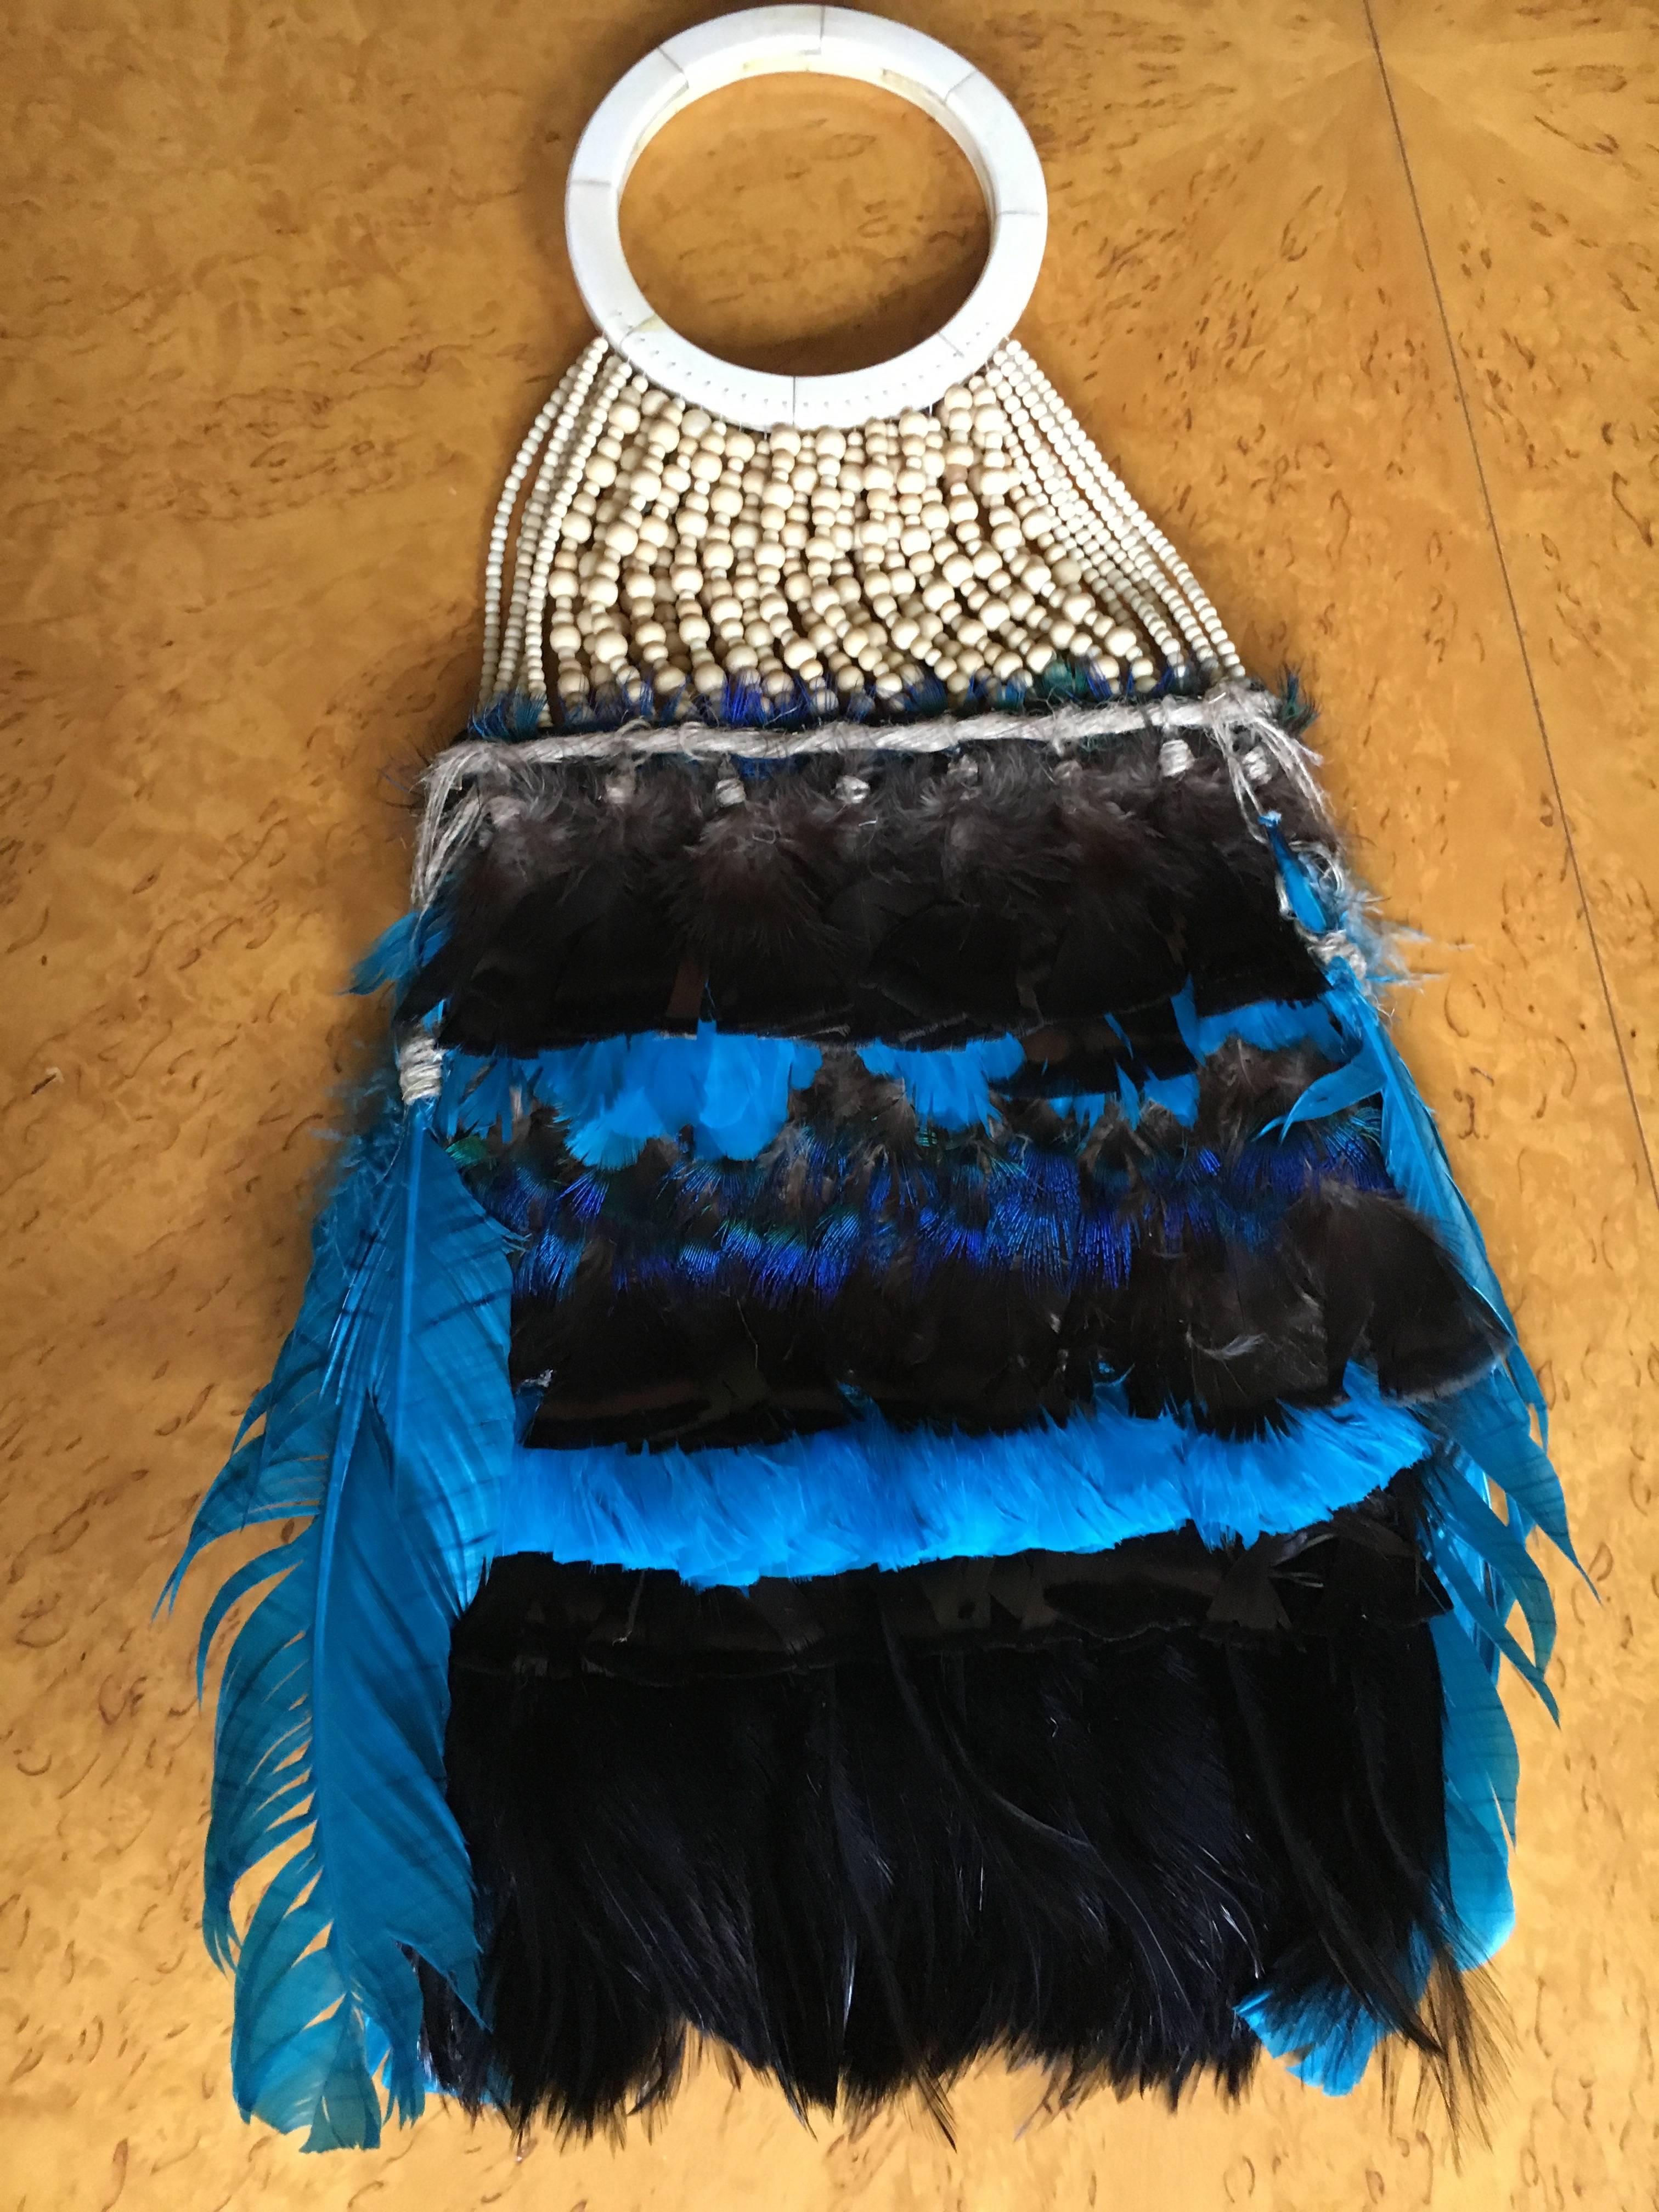 Alexander McQueen 2003 Exquisite Bead and Feather Handbag In Excellent Condition For Sale In Cloverdale, CA